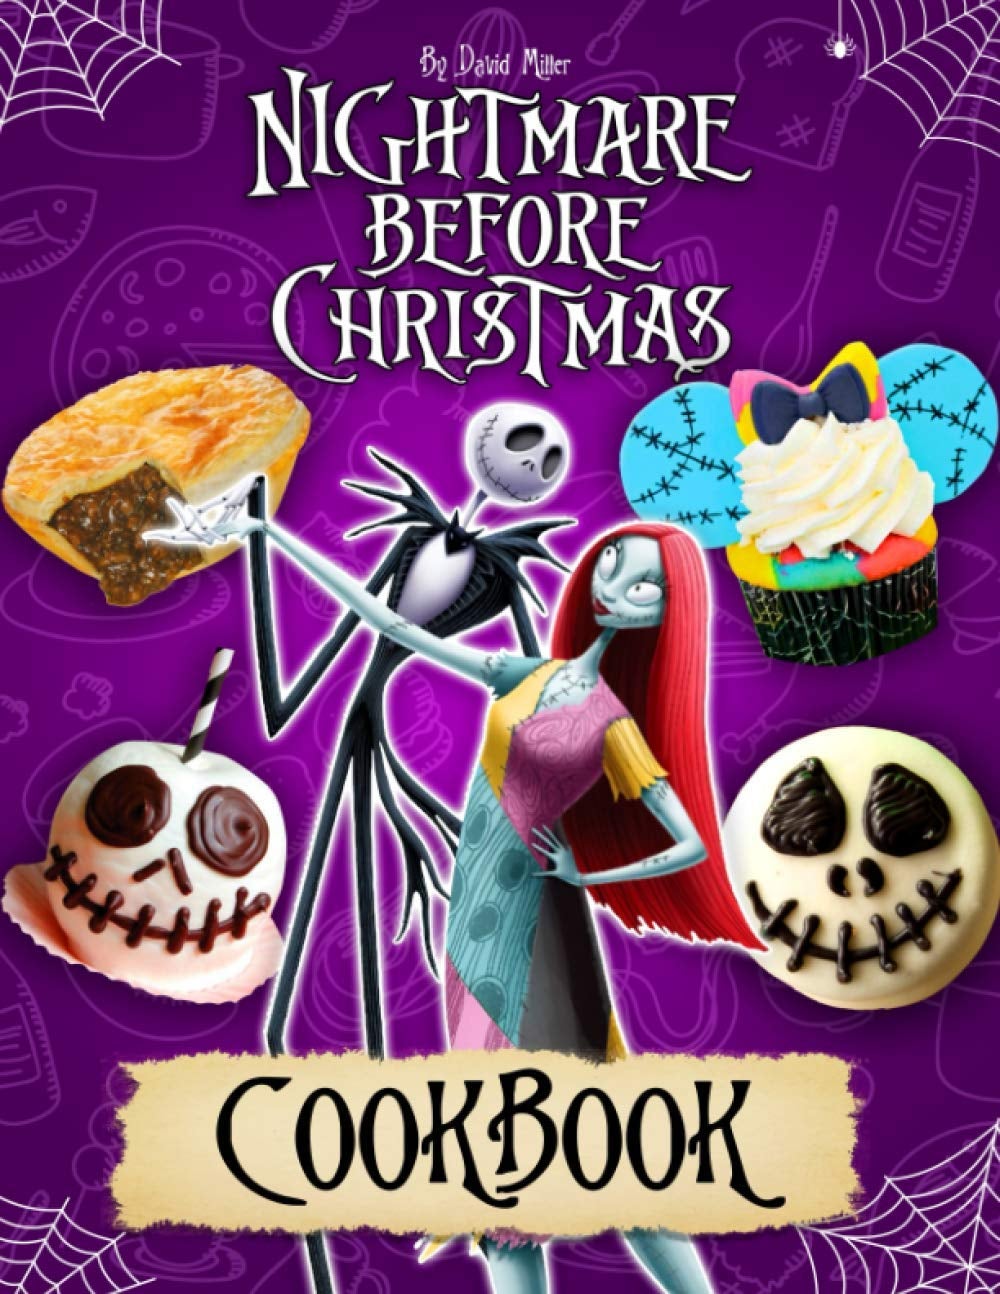 the cookbook cover